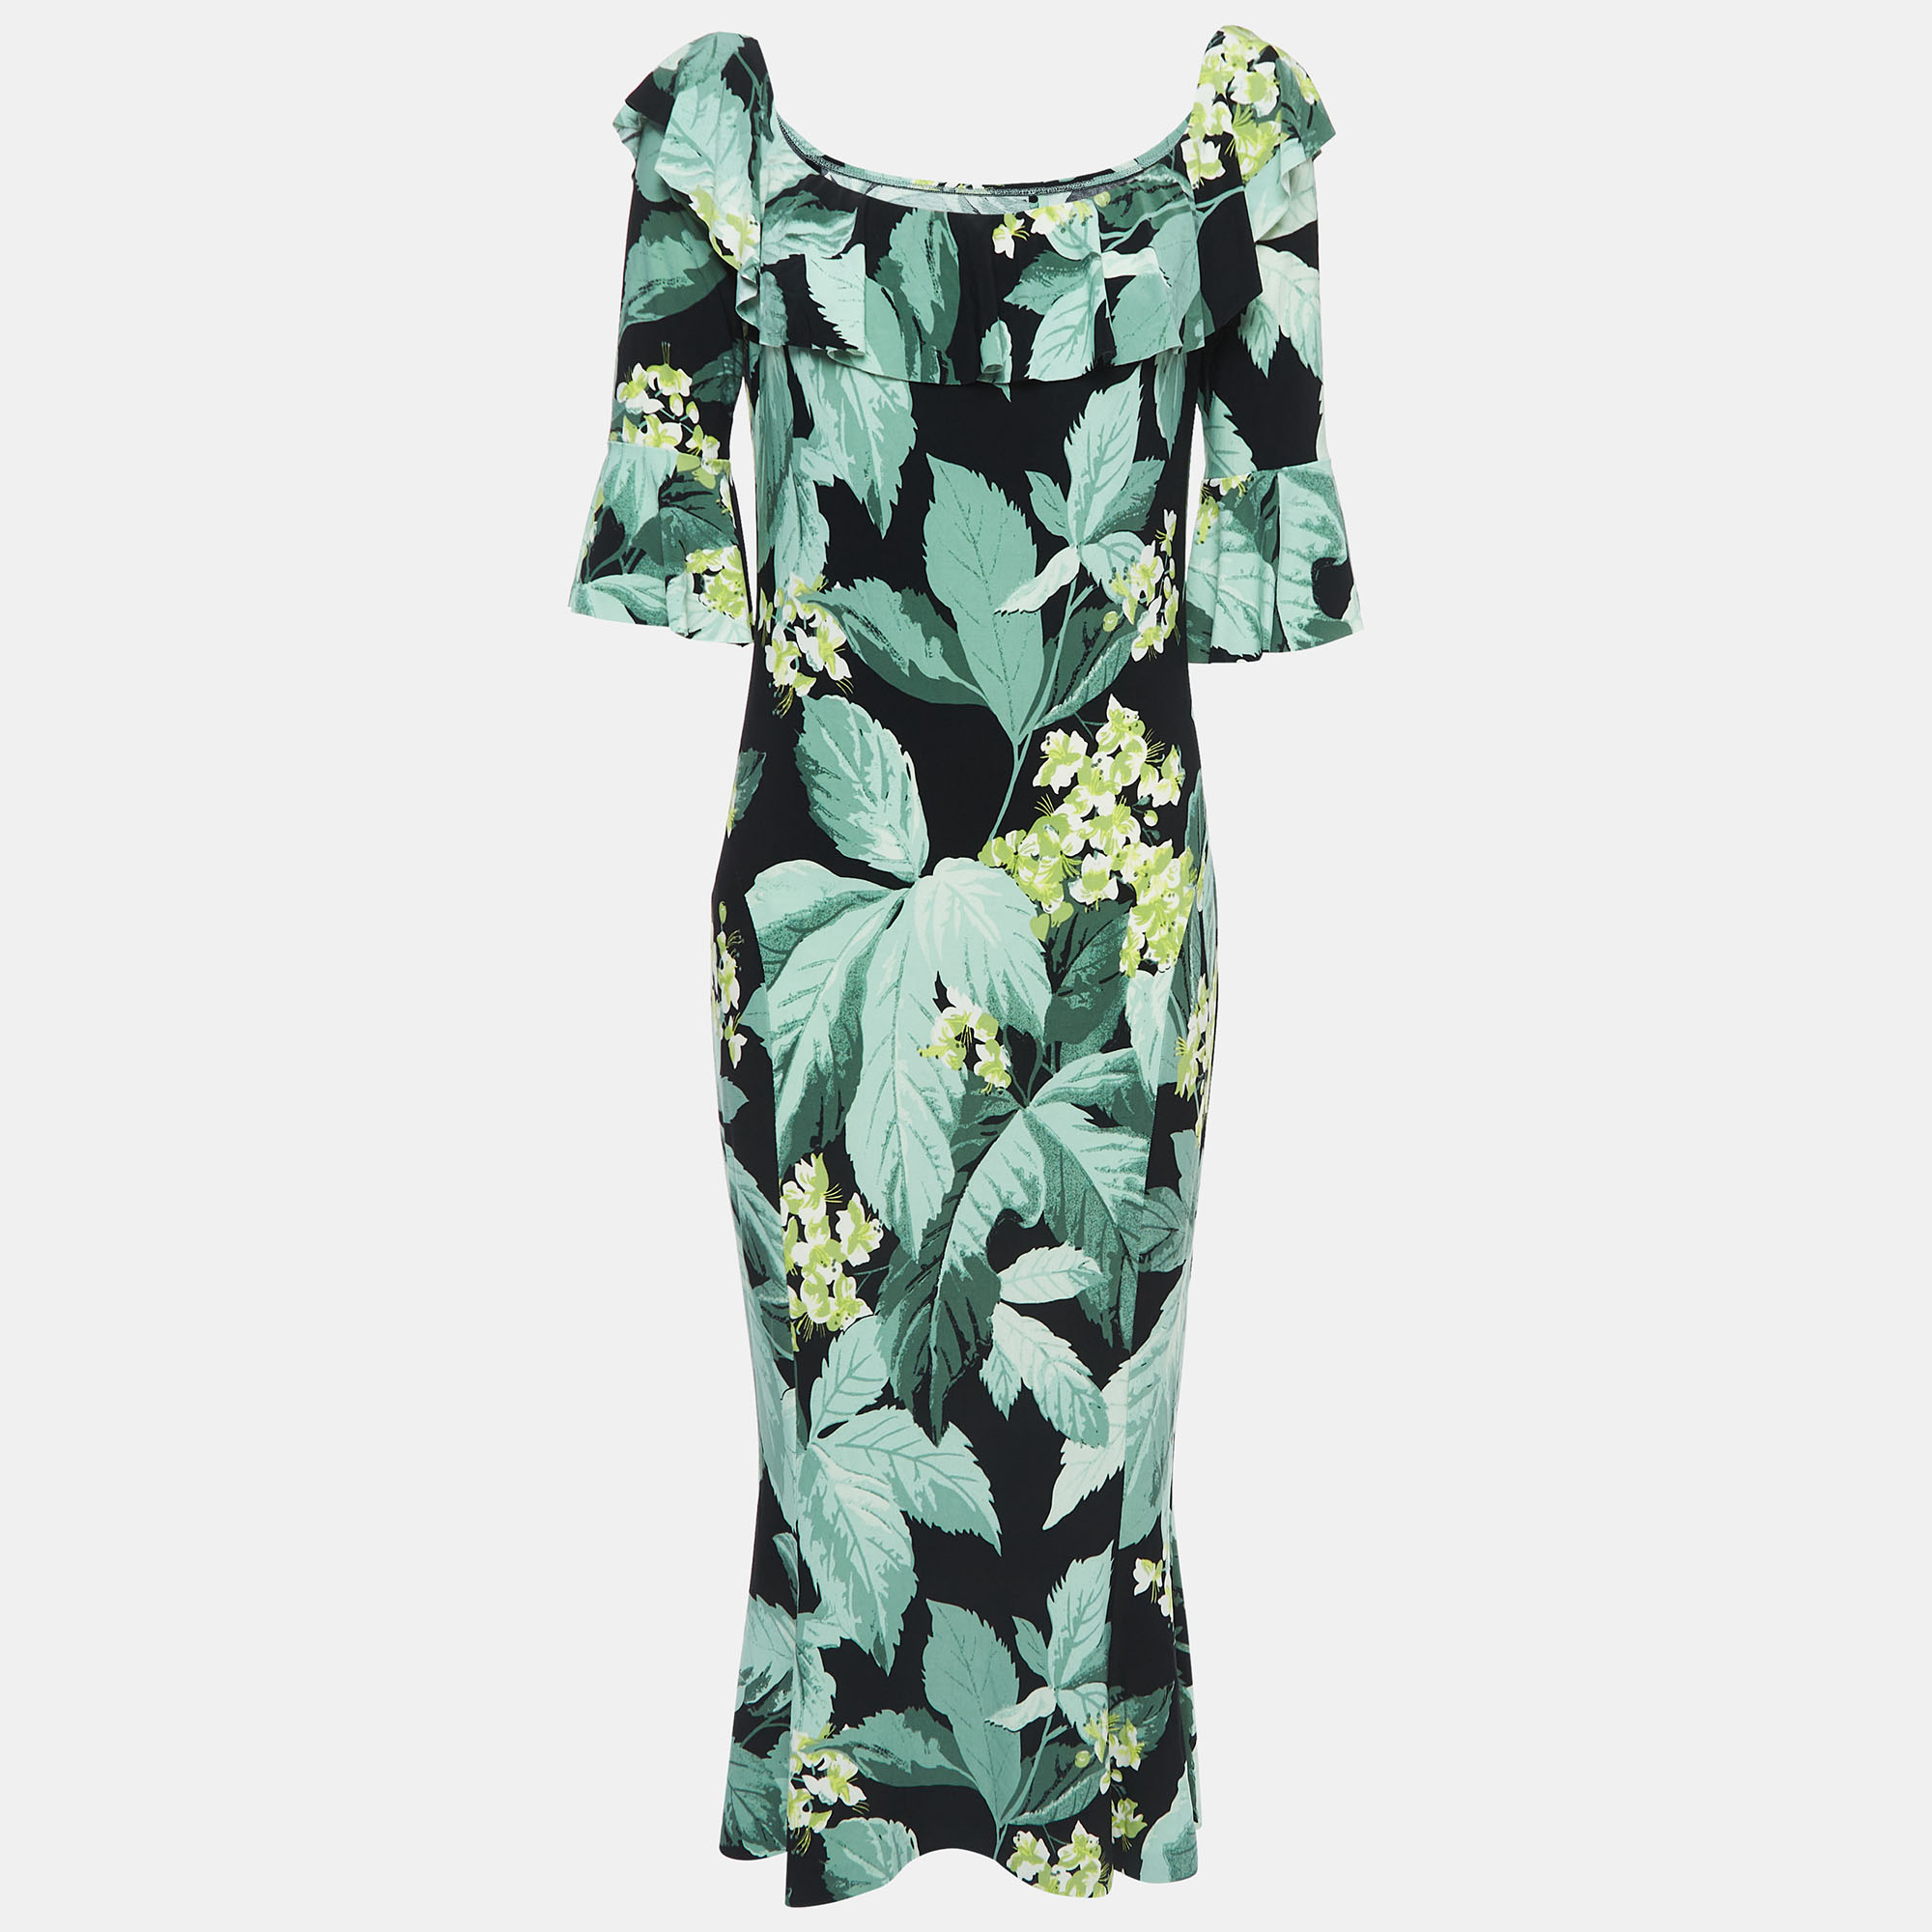 Leaf print off shoulder fishtail dress ruffled detailing and below knee length. Refresh your summer wardrobe by adding this beautiful dress from Norma Kamali. Complement it with high heels.